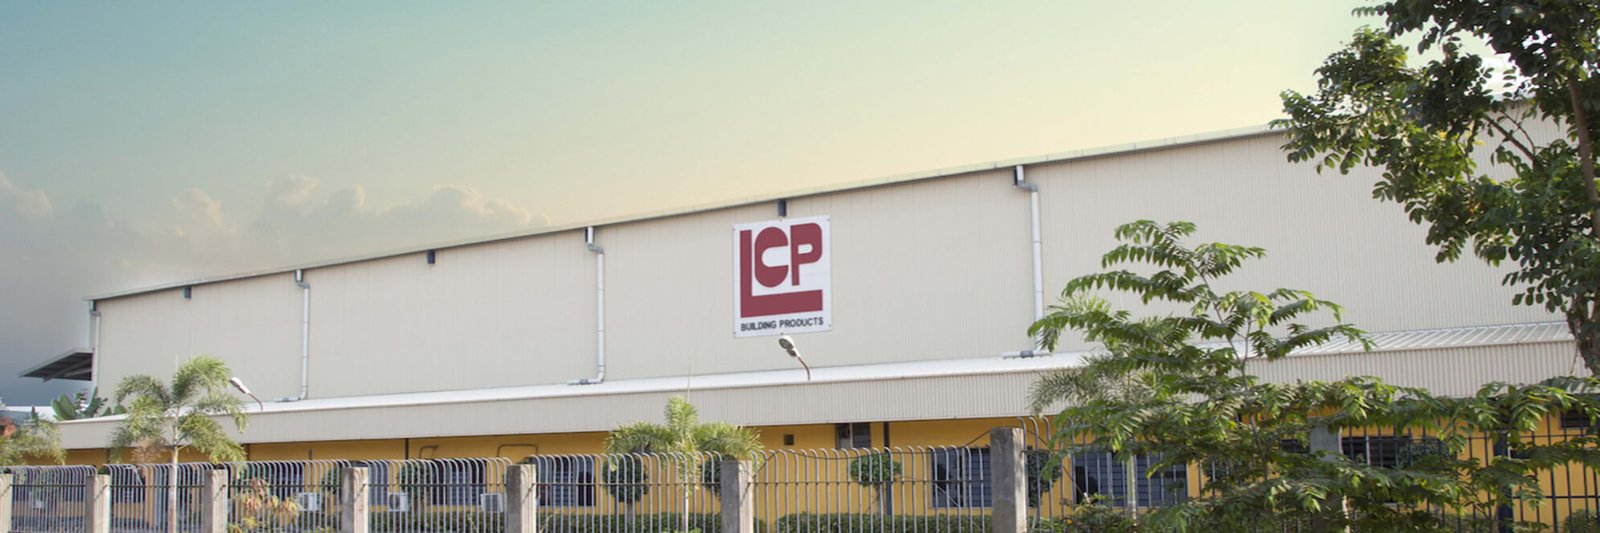 best roof sheet manufacturer in UAE: LCP Sliders